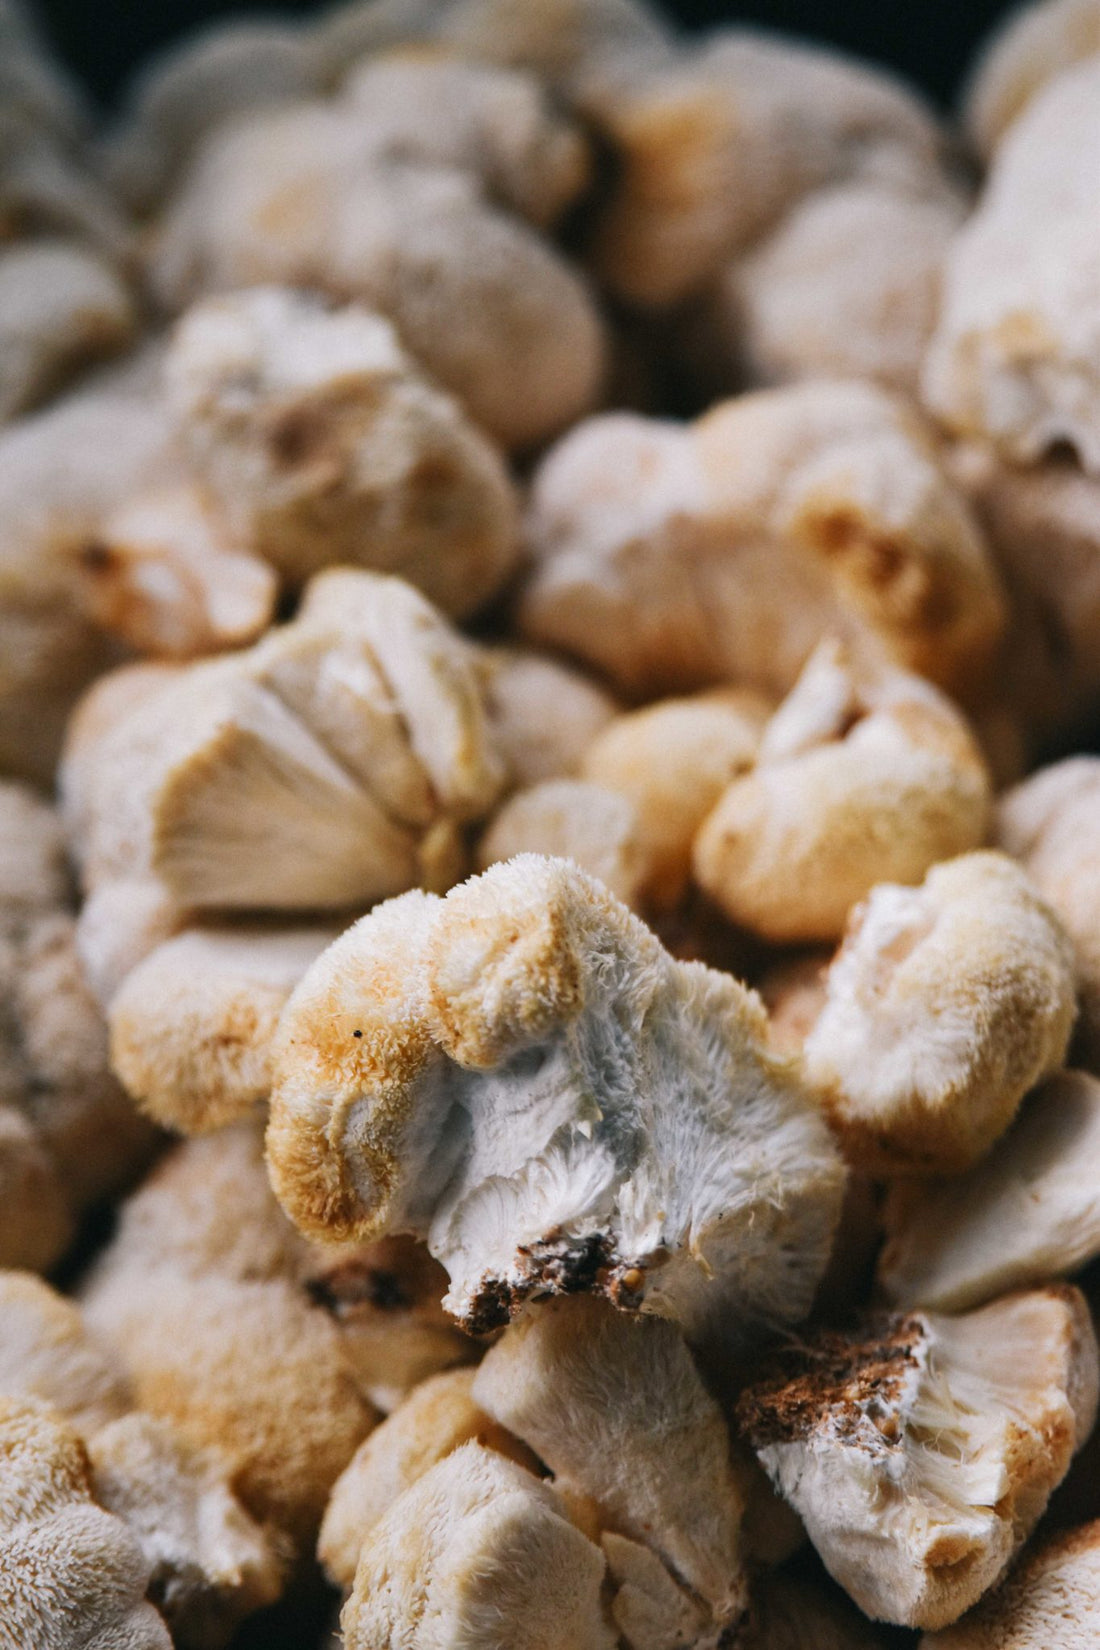 How Long Do Mushrooms Last? Discover Ways to Increase Their Usage